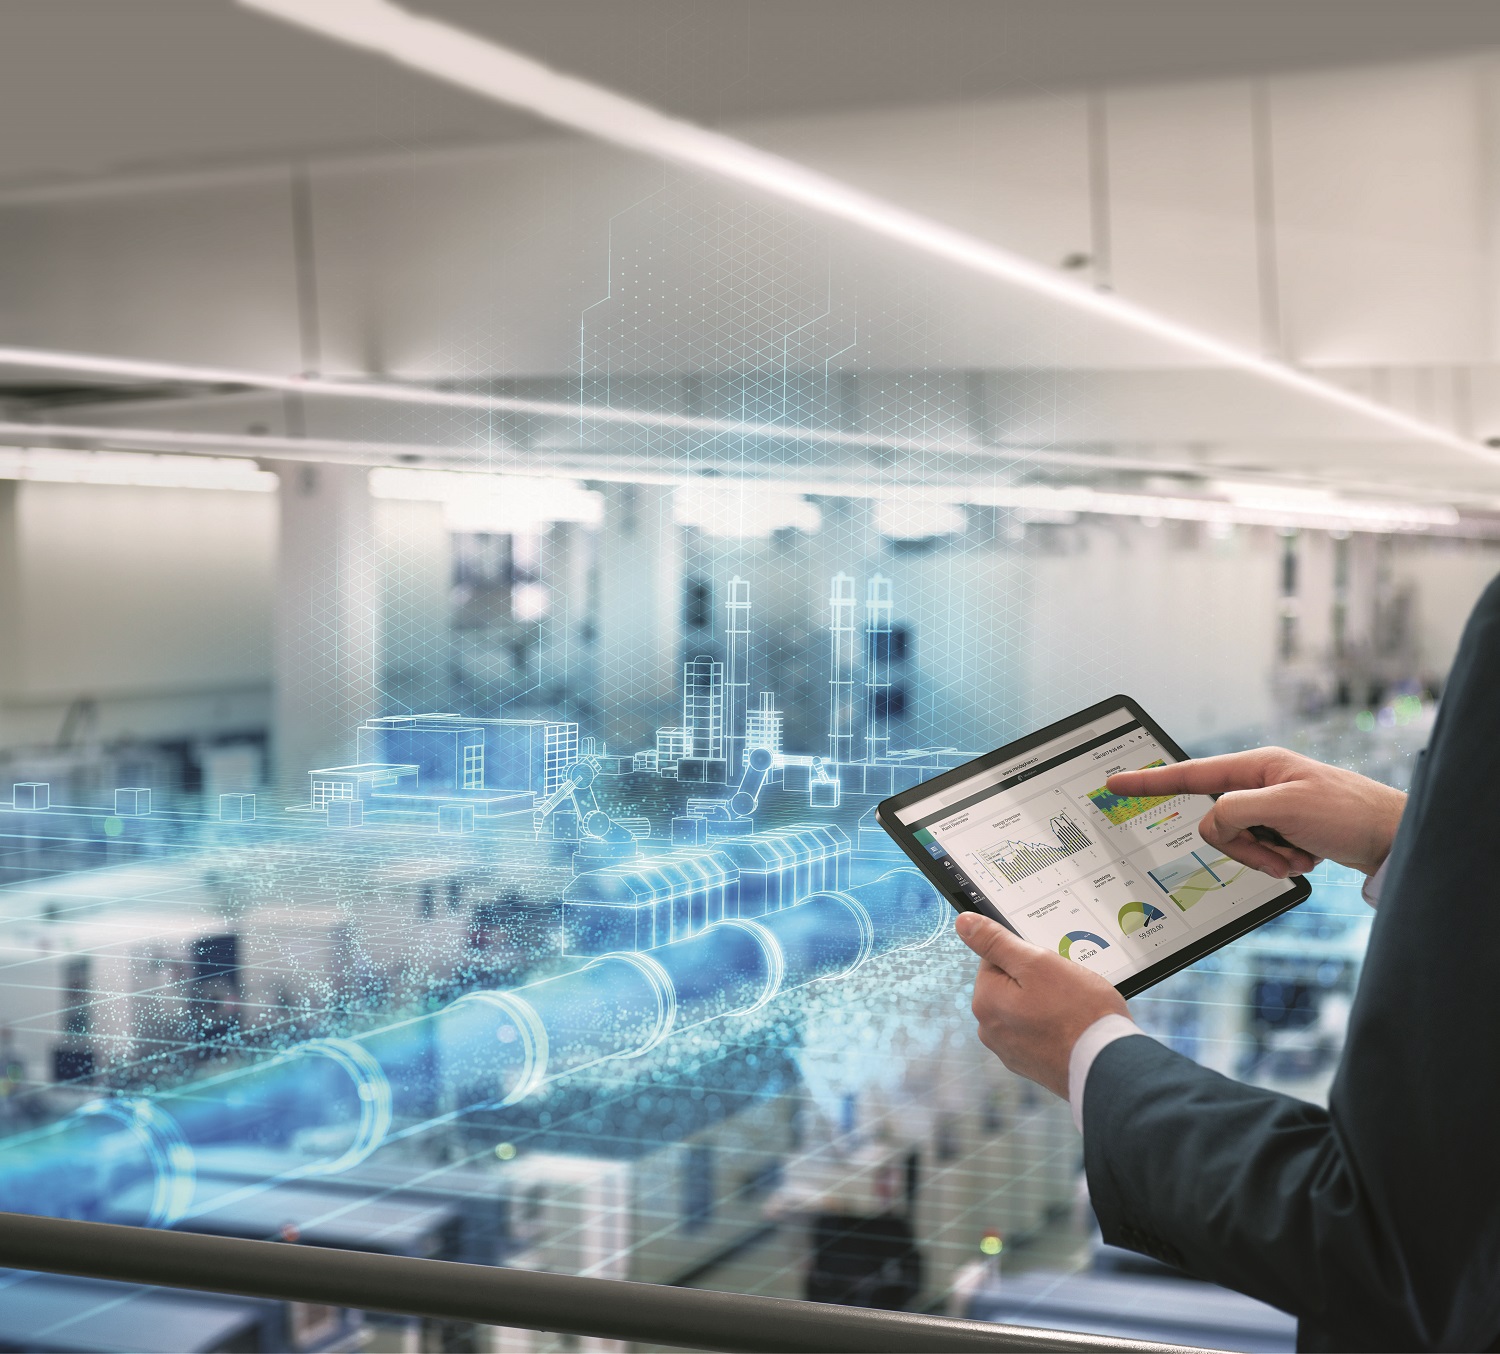 At SPS 2019, Siemens is introducing a newly developed complete system for industrial operation and monitoring.